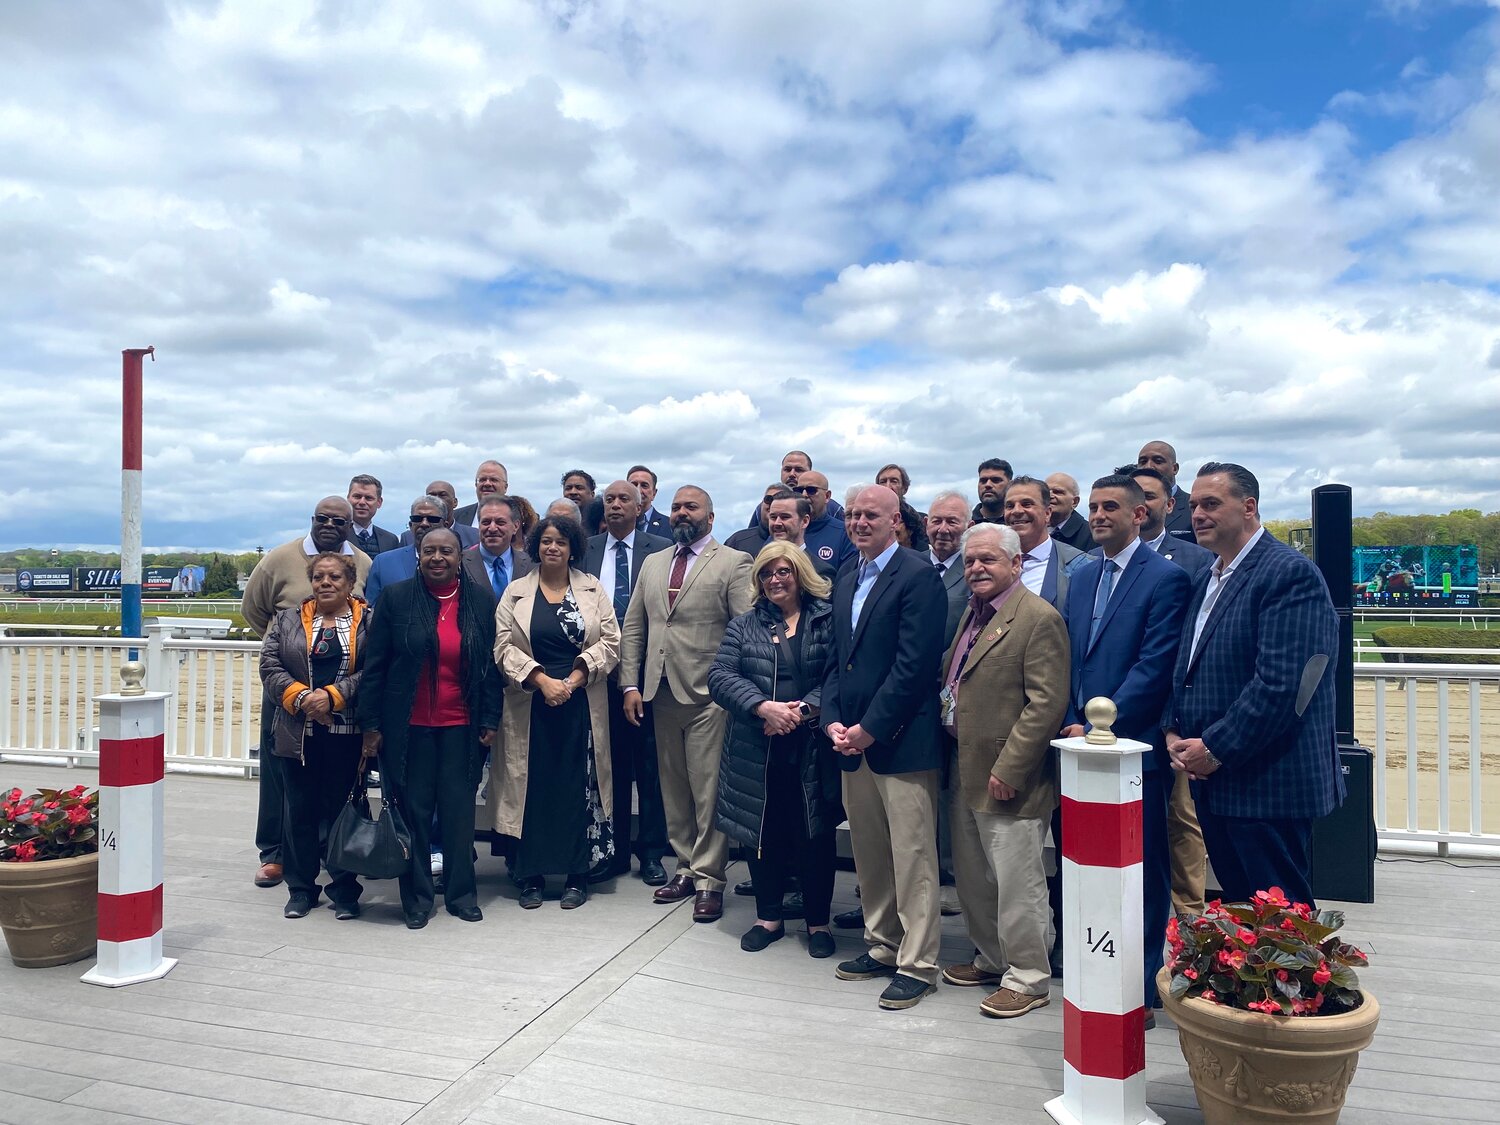 Elected officials, Elmont community leaders and others joined the New York Racing Association at Belmont Park to kick off opening day on May 4, and to announce the state’s approval of a $455 million loan to renovate the historic horse racing facility.